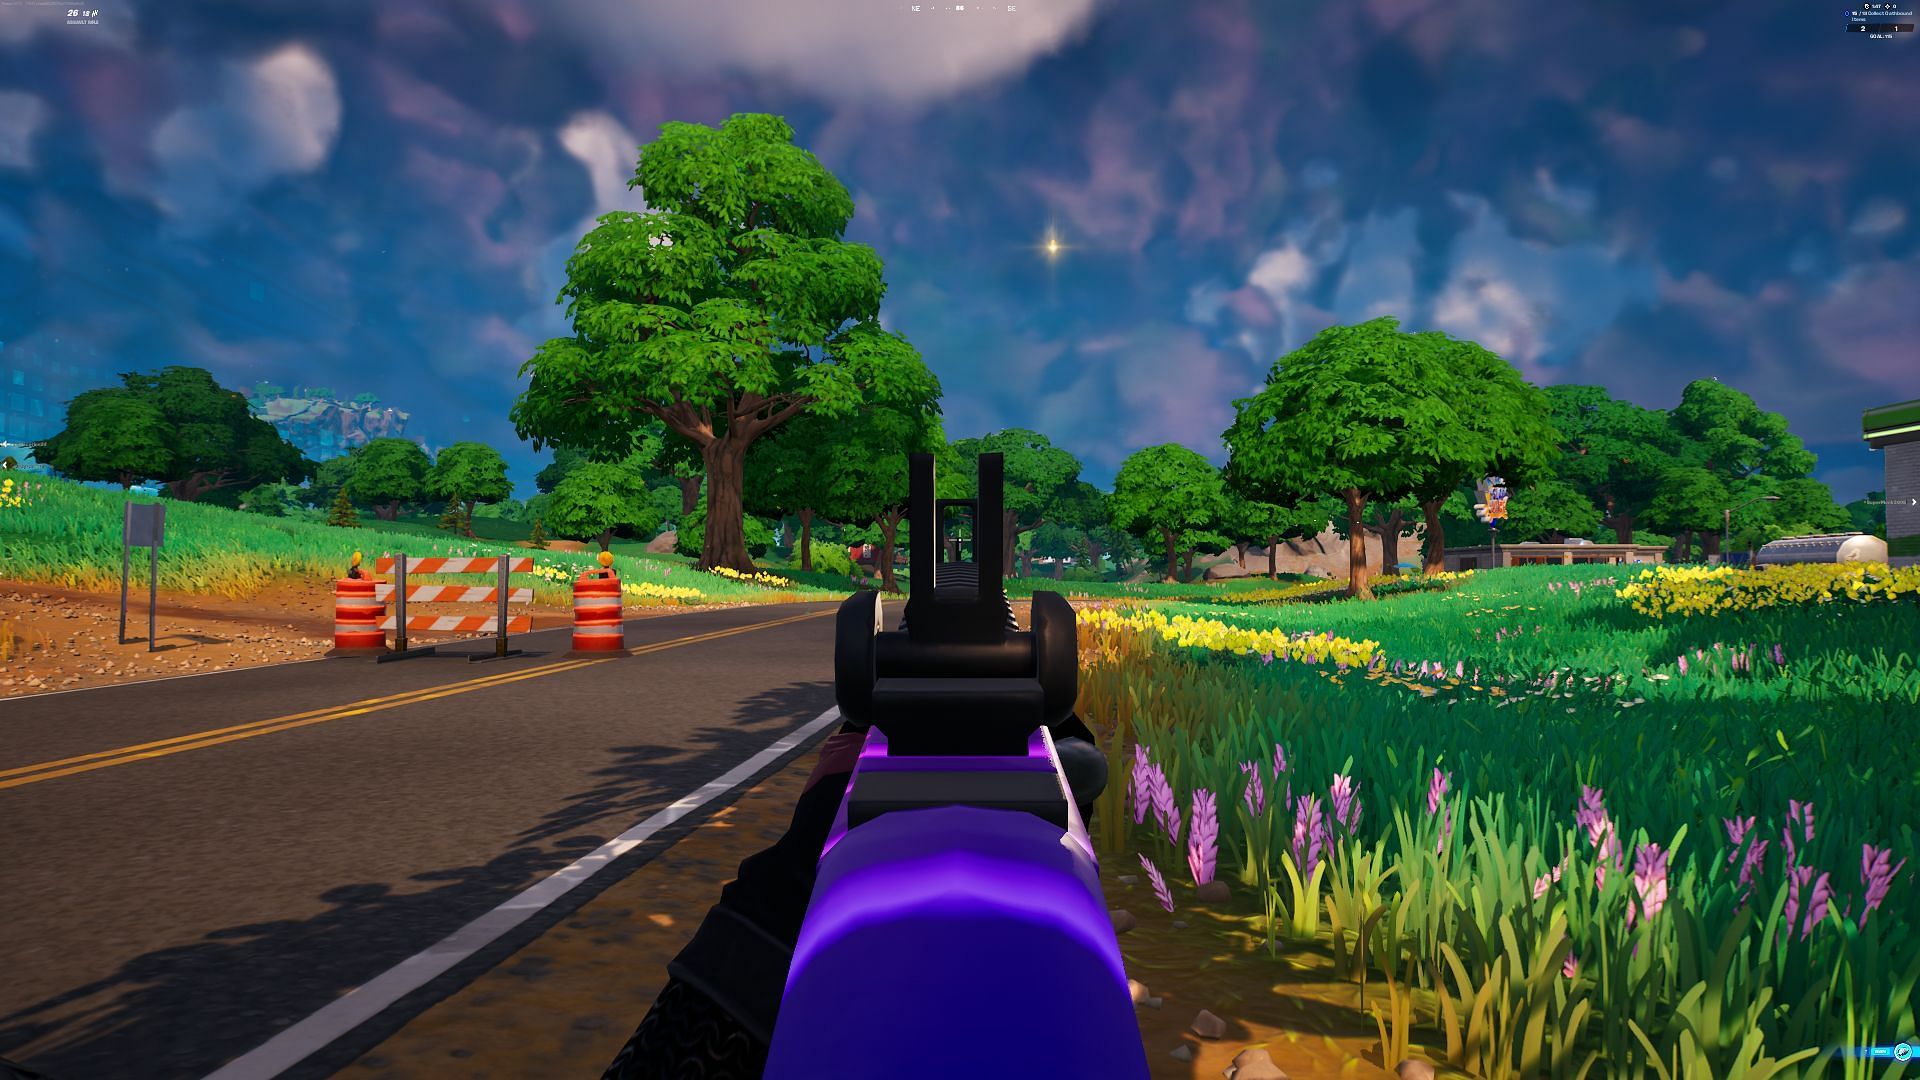 The first-person mode in Fortnite will change how the game is played (Image via Epic Games/Fortnite)